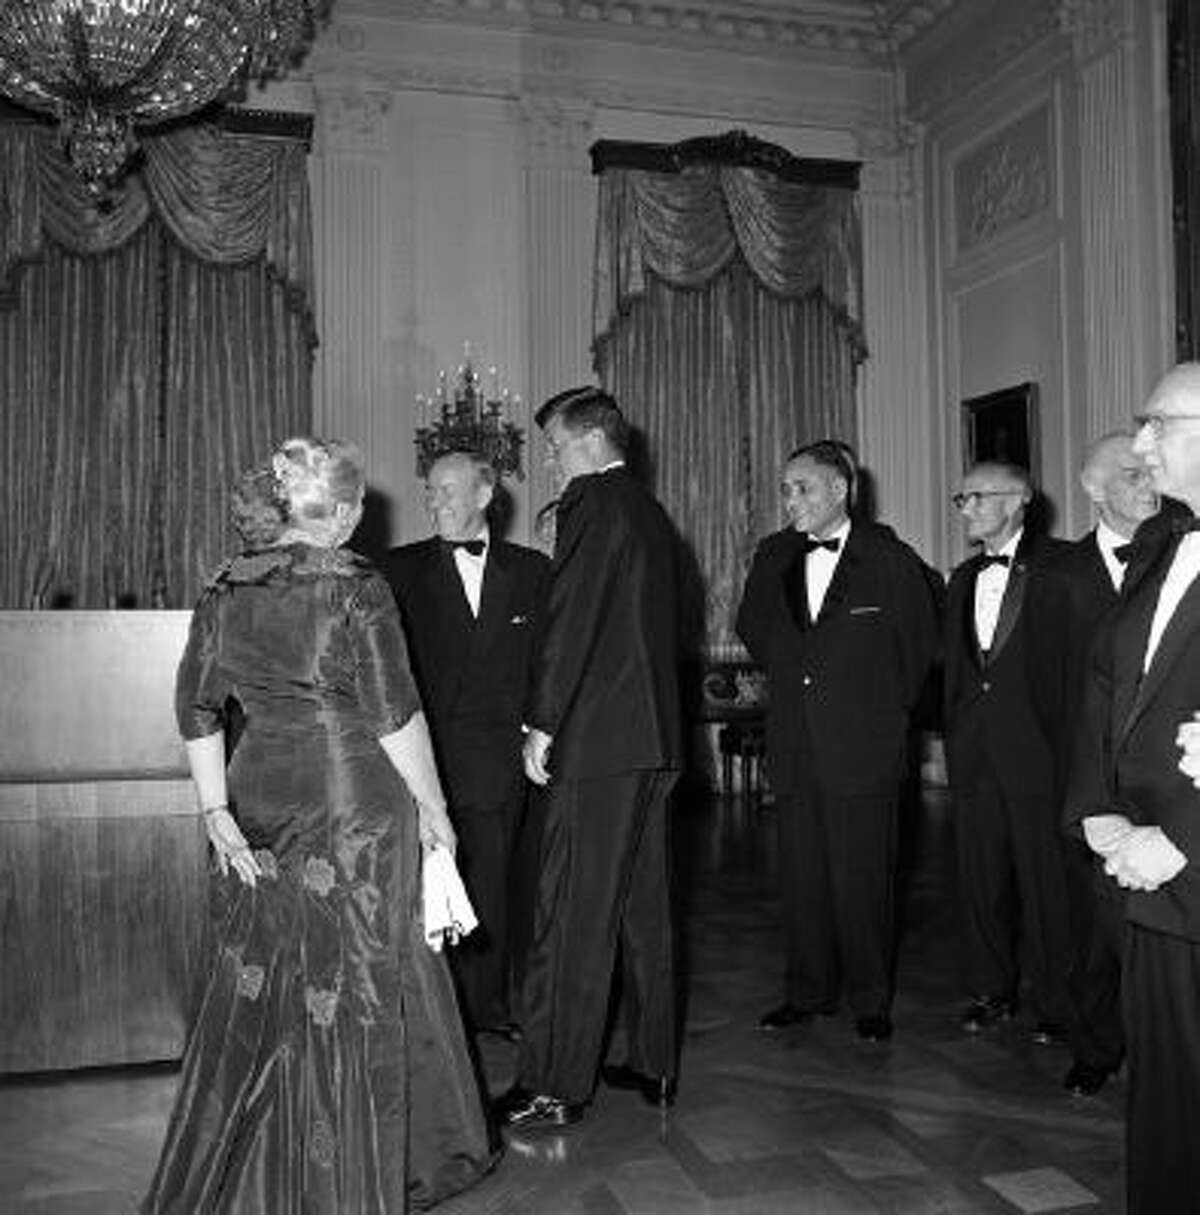 President John F. Kennedy and Lester Pearson, leader of Canadas Liberal Party and winner of the 1957 Nobel Peace Prize, talk at the White House, Washington, April 29, 1962 with Pearl Buck, back to camera, and Pearson's wife Maryon, before a White House dinner honoring Nobel Prize winner of the western Hemisphere.